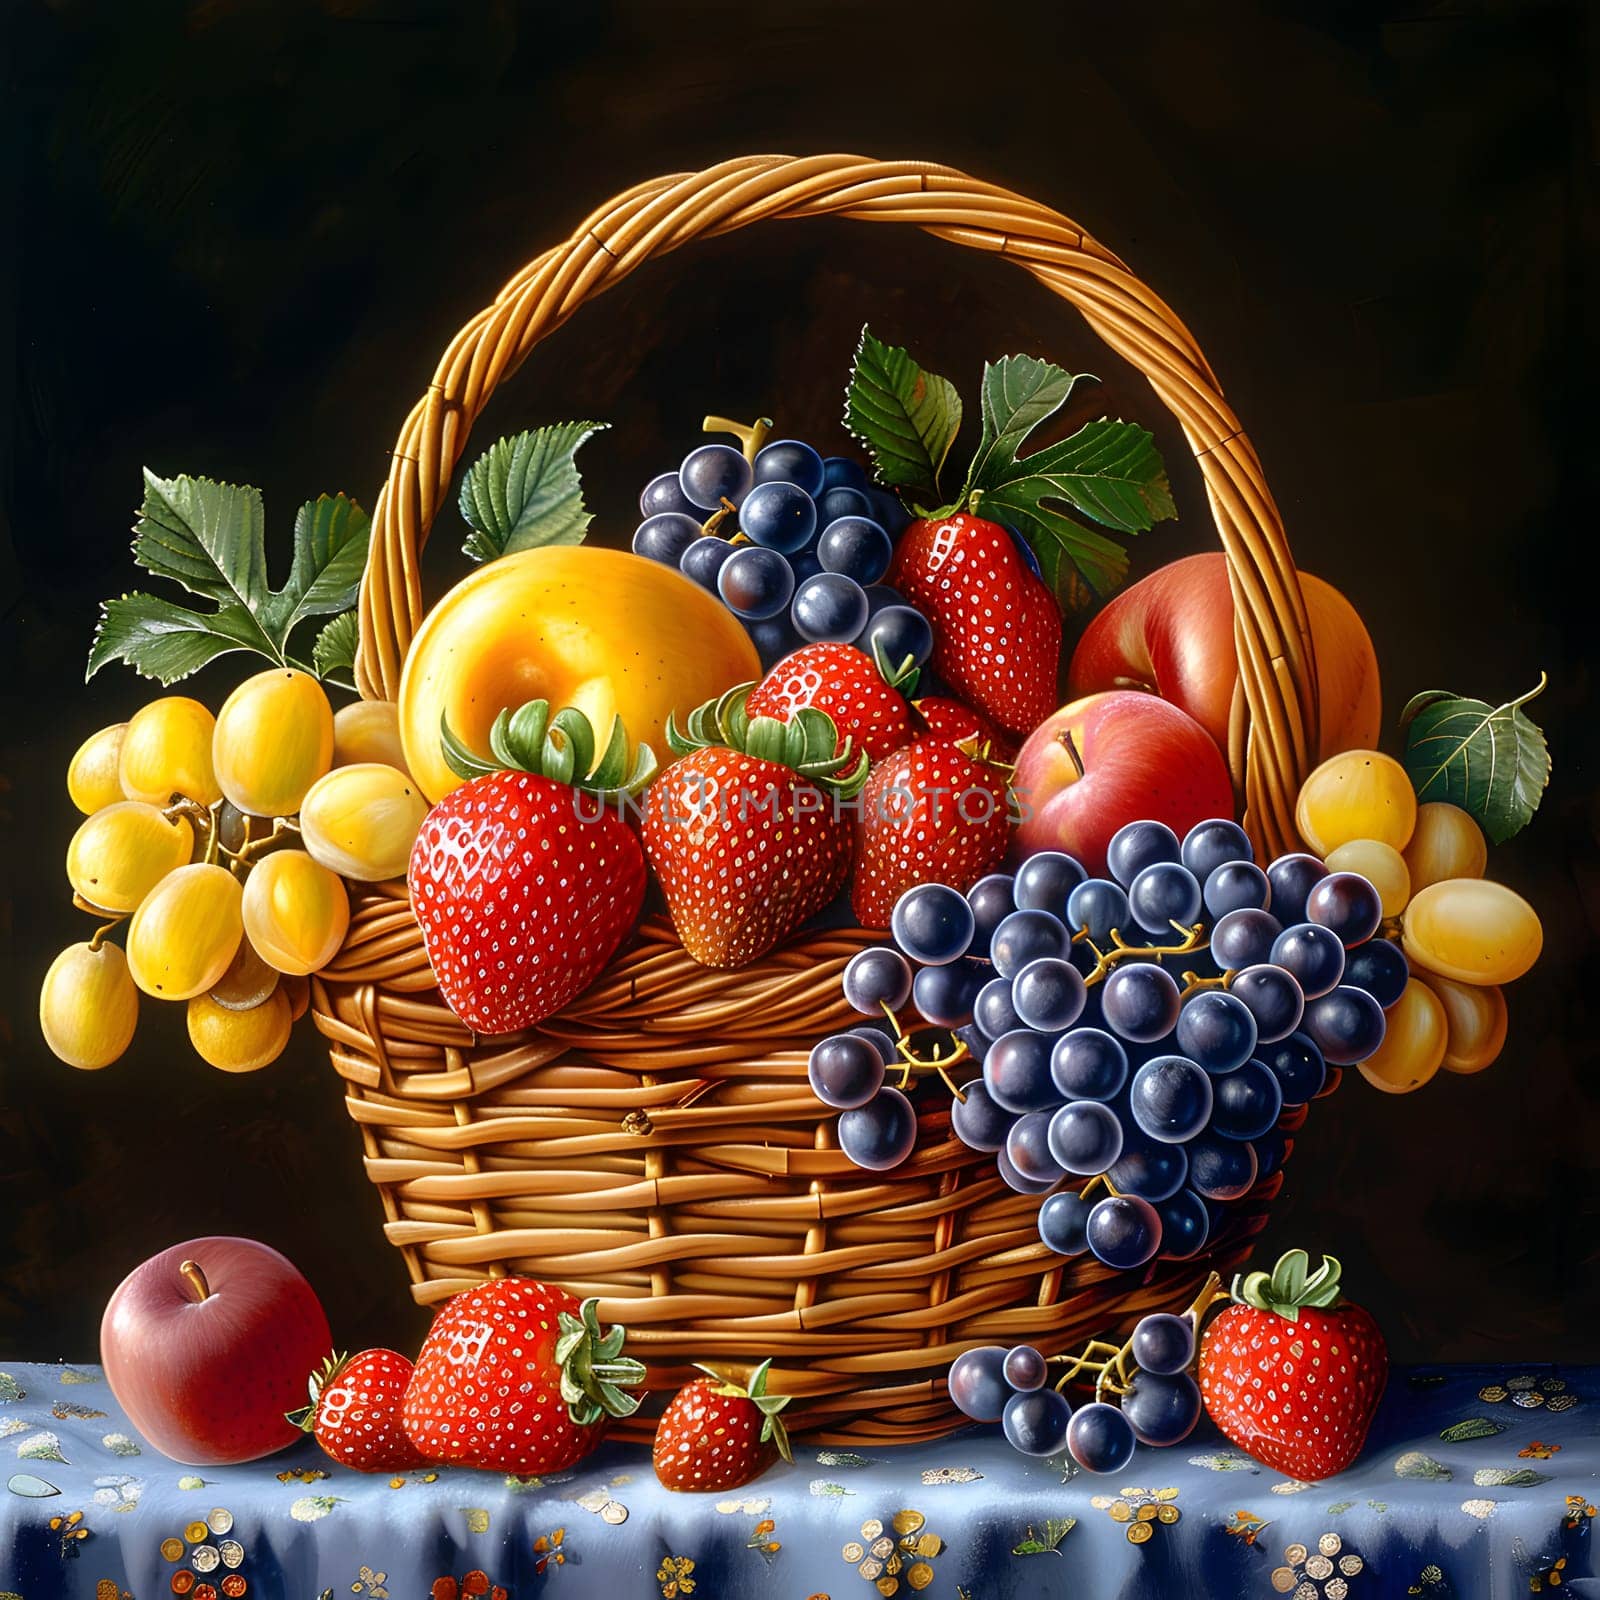 a basket filled with strawberries grapes apples and other fruit by Nadtochiy